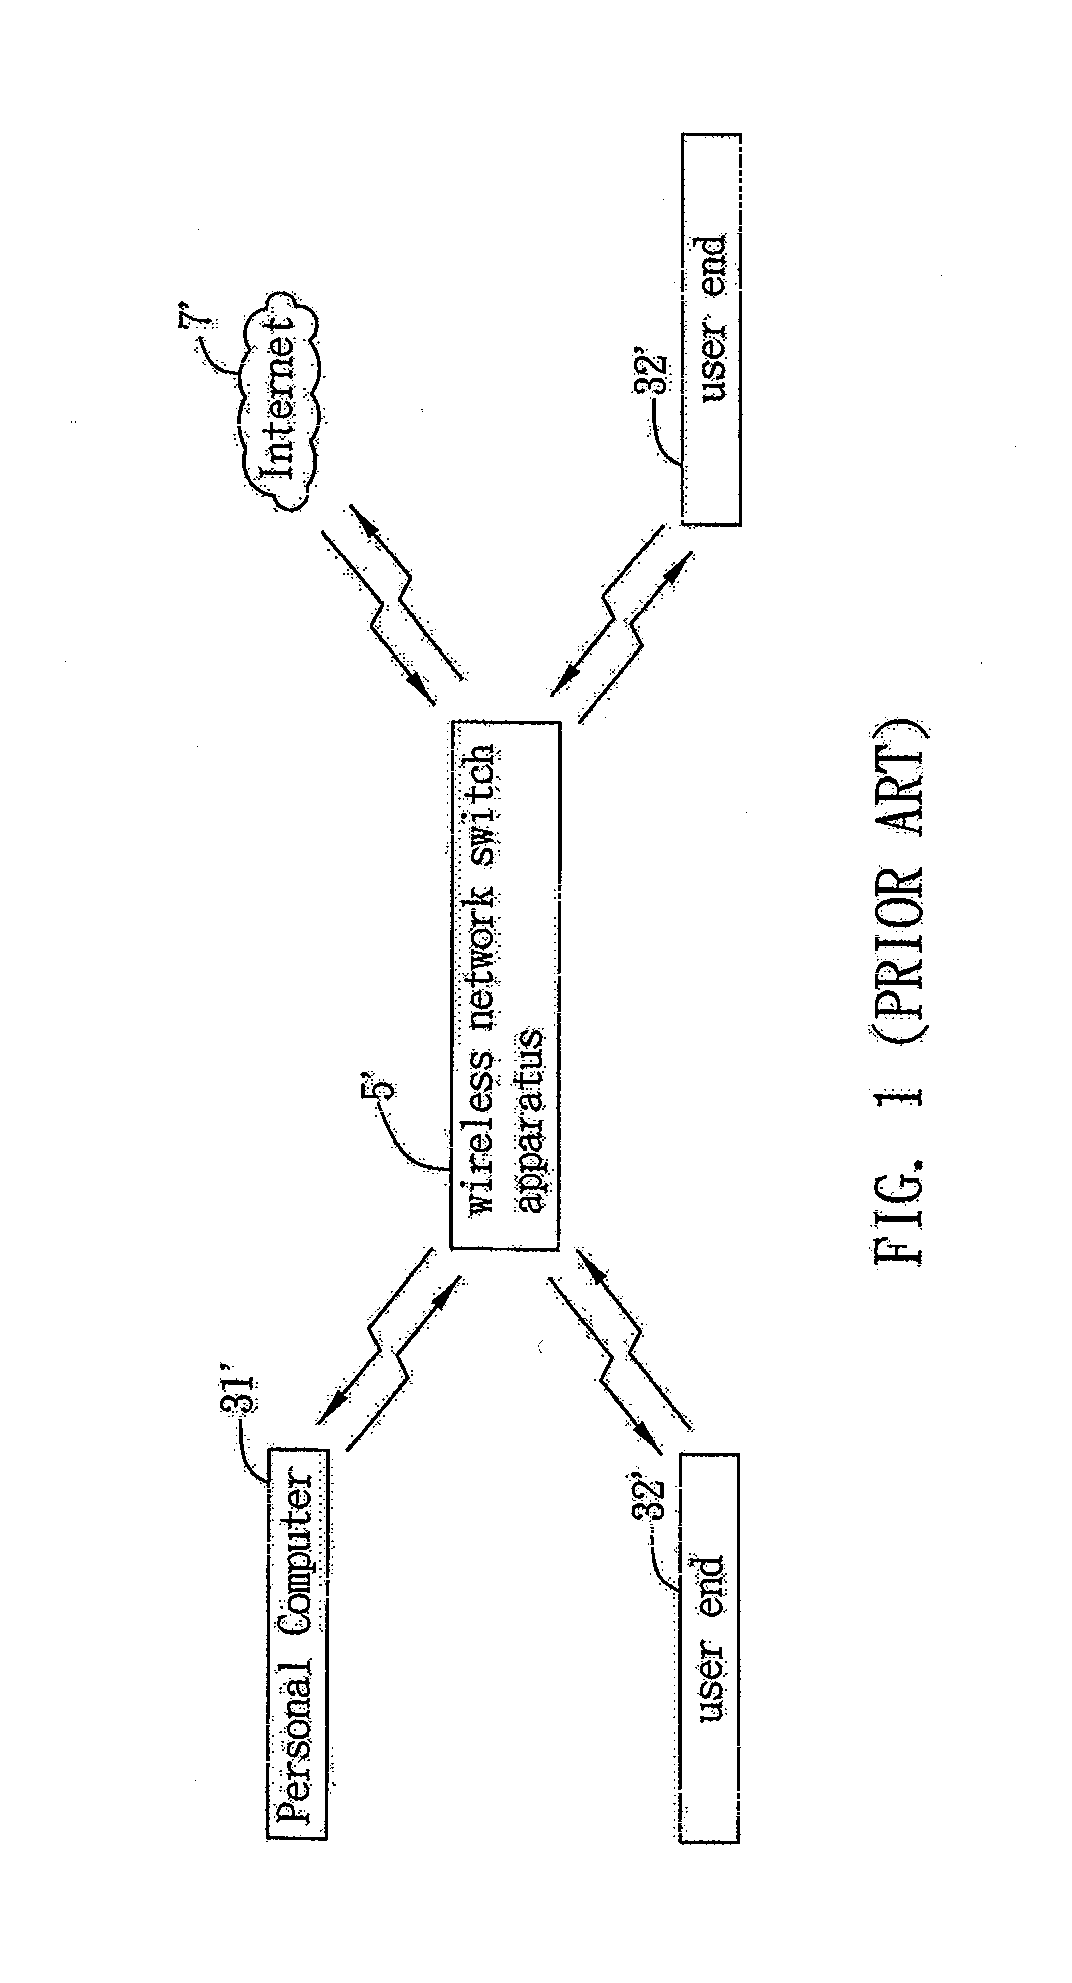 Fingerprint authentication method for accessing wireless network systems